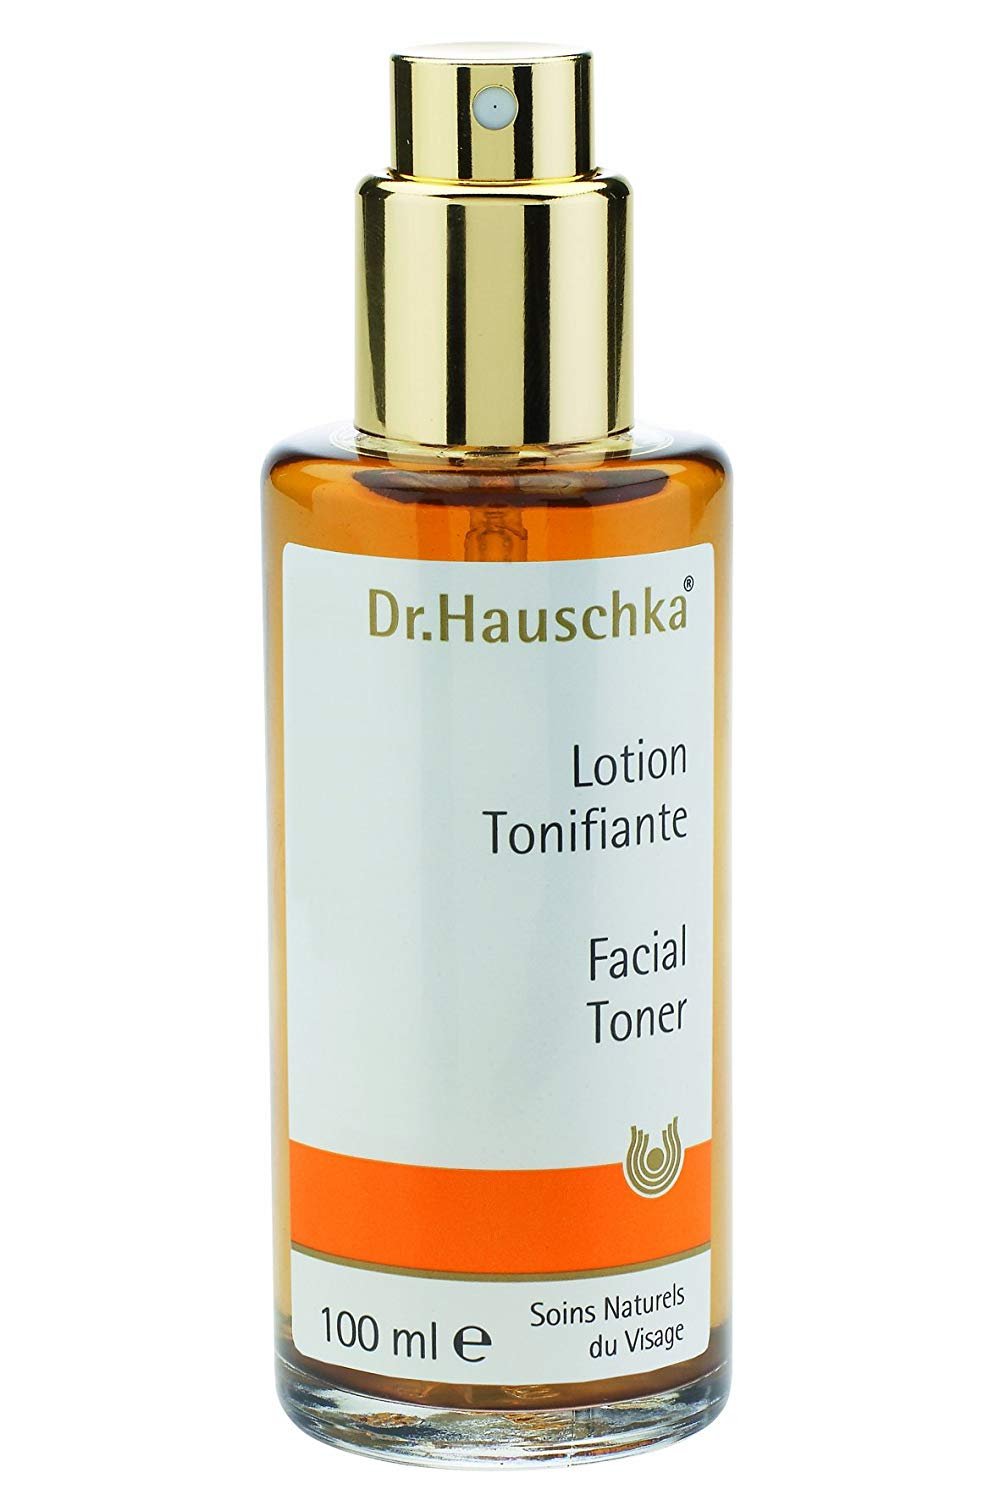 Dr. Hauschka Facial Toner for Normal, Dry and Sensitive Skin, 3.4 Ounce